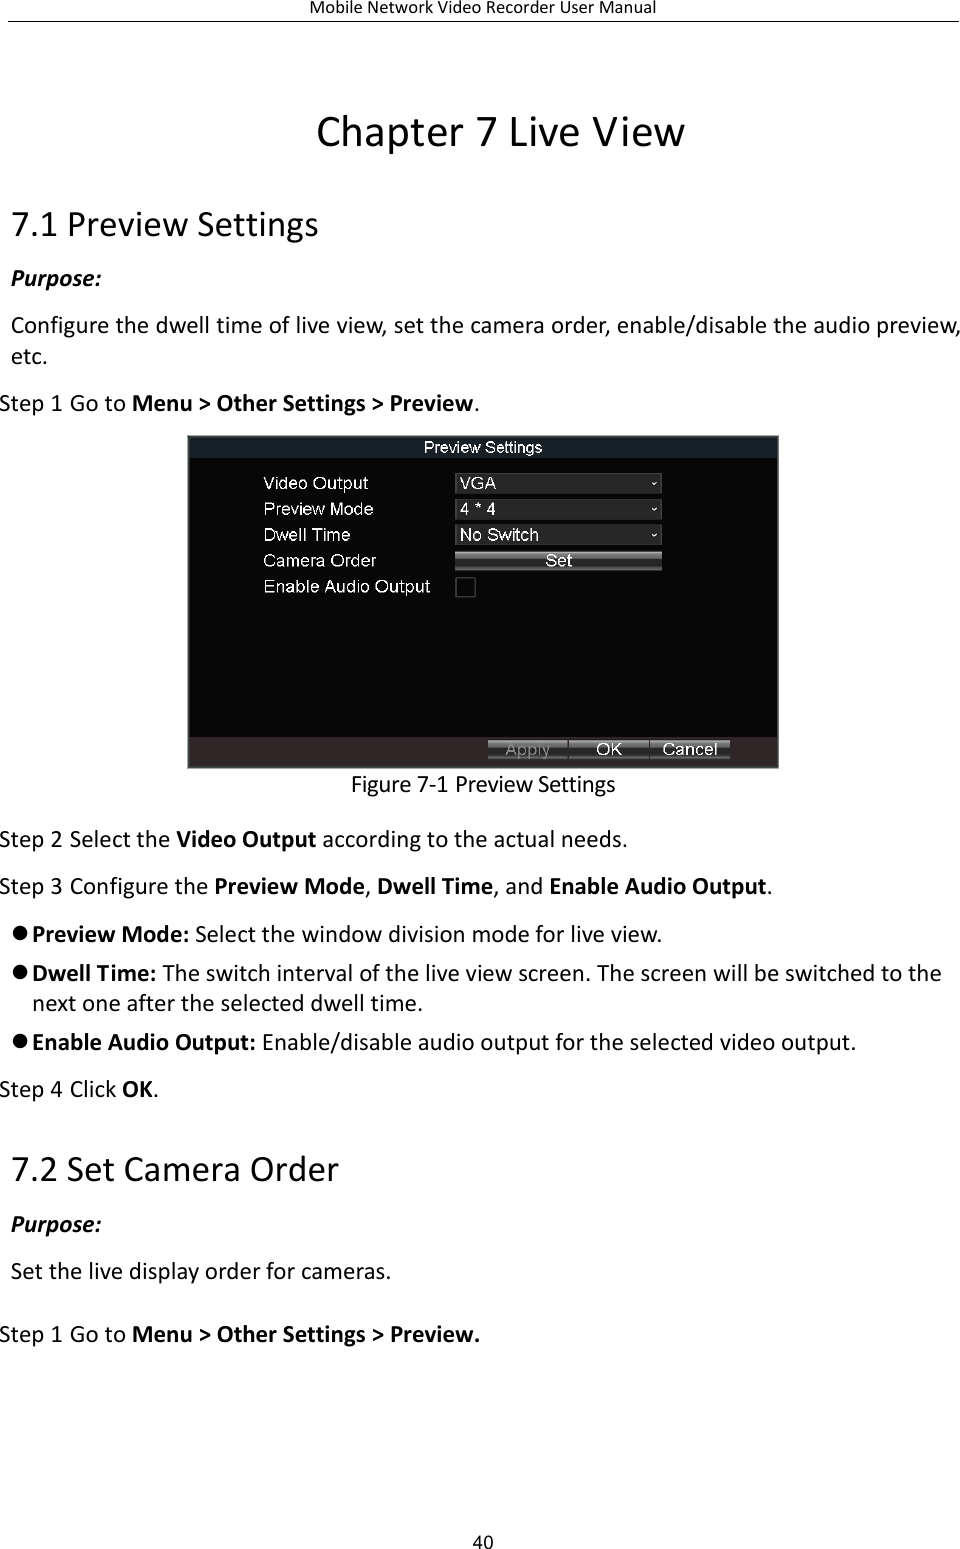 Mobile Network Video Recorder User Manual 40 Chapter 7 Live View 7.1 Preview Settings Purpose:   Configure the dwell time of live view, set the camera order, enable/disable the audio preview, etc. Step 1 Go to Menu &gt; Other Settings &gt; Preview.  Figure 7-1 Preview Settings Step 2 Select the Video Output according to the actual needs. Step 3 Configure the Preview Mode, Dwell Time, and Enable Audio Output.  Preview Mode: Select the window division mode for live view.  Dwell Time: The switch interval of the live view screen. The screen will be switched to the next one after the selected dwell time.  Enable Audio Output: Enable/disable audio output for the selected video output. Step 4 Click OK. 7.2 Set Camera Order Purpose: Set the live display order for cameras. Step 1 Go to Menu &gt; Other Settings &gt; Preview. 